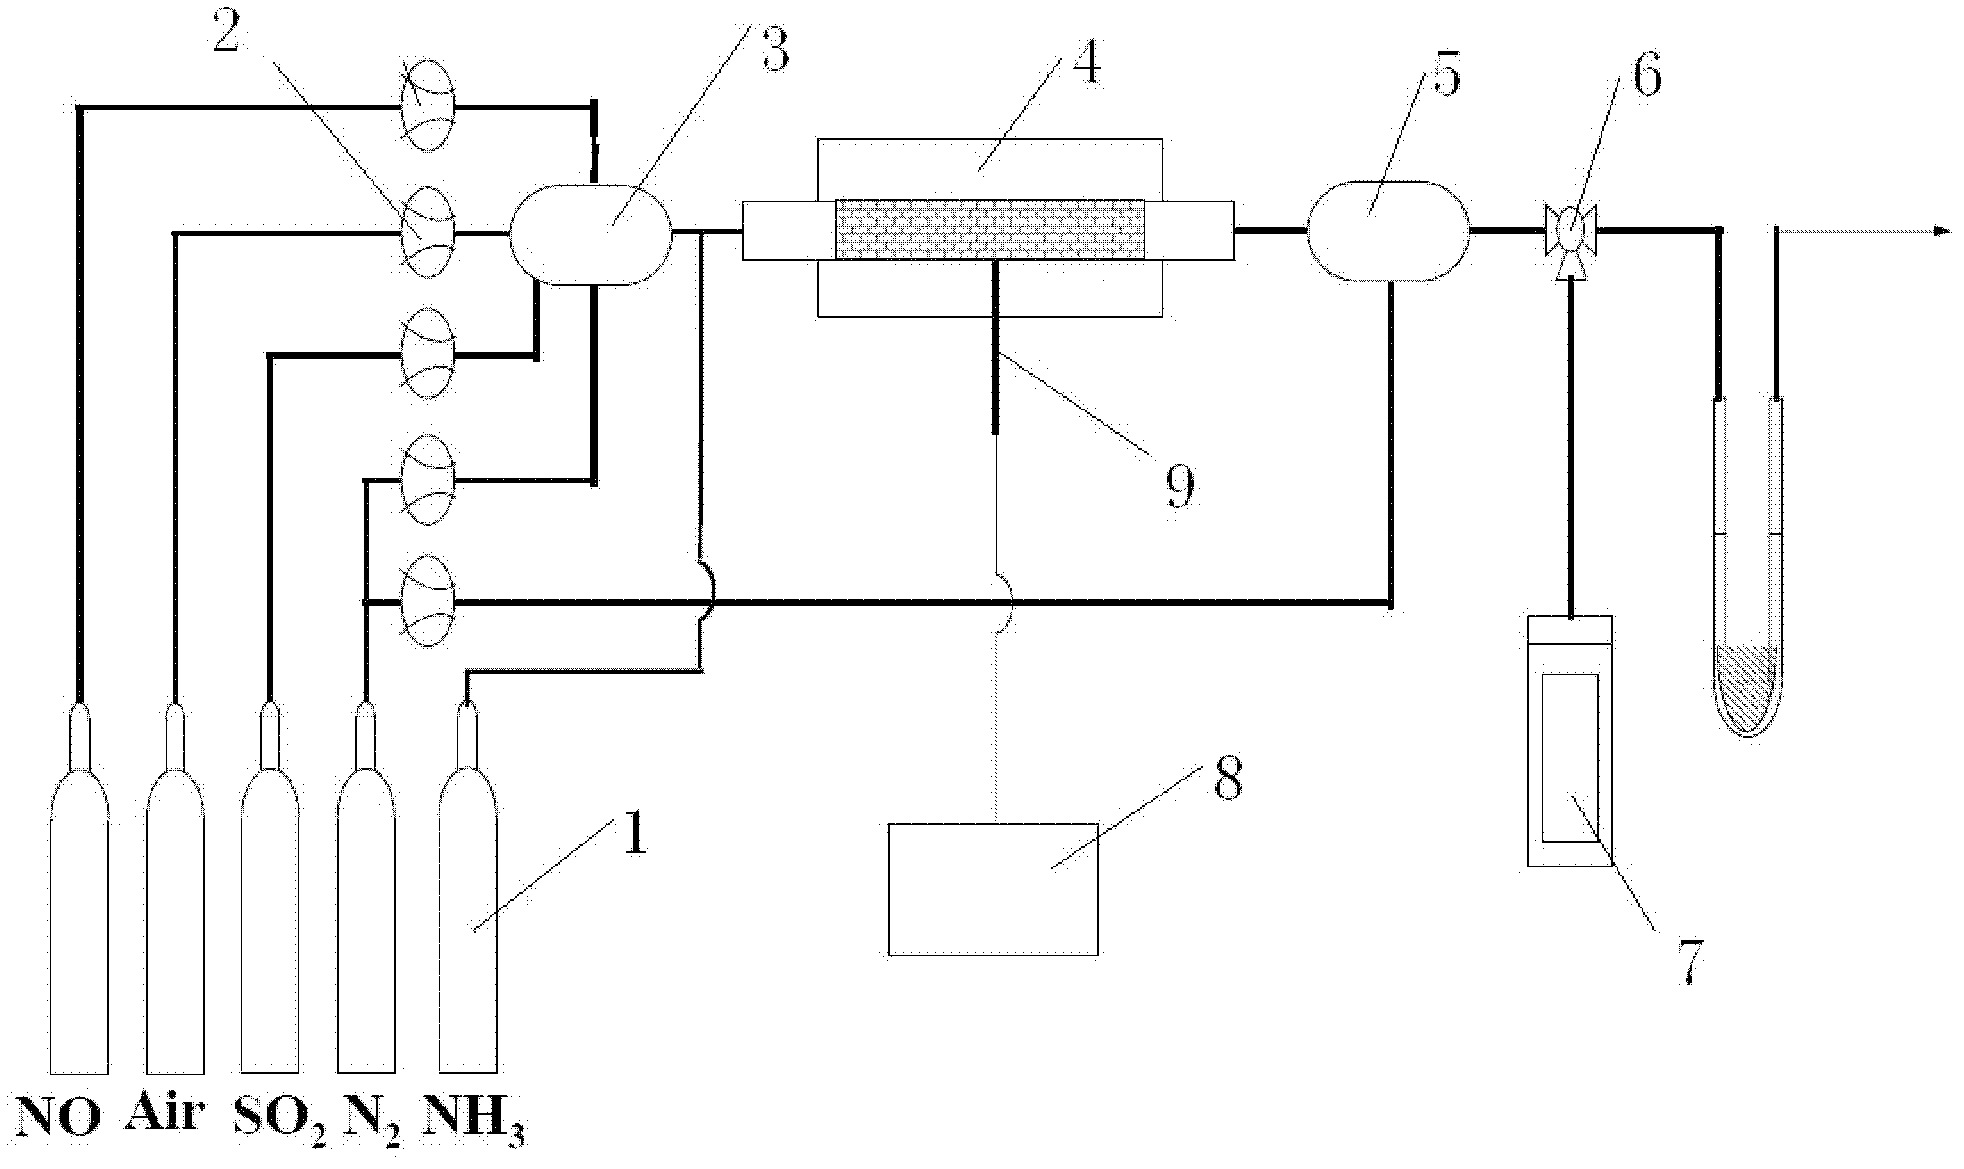 Modifying method for catalyst activity in power plant SCR (selective catalytic reduction) denitration system